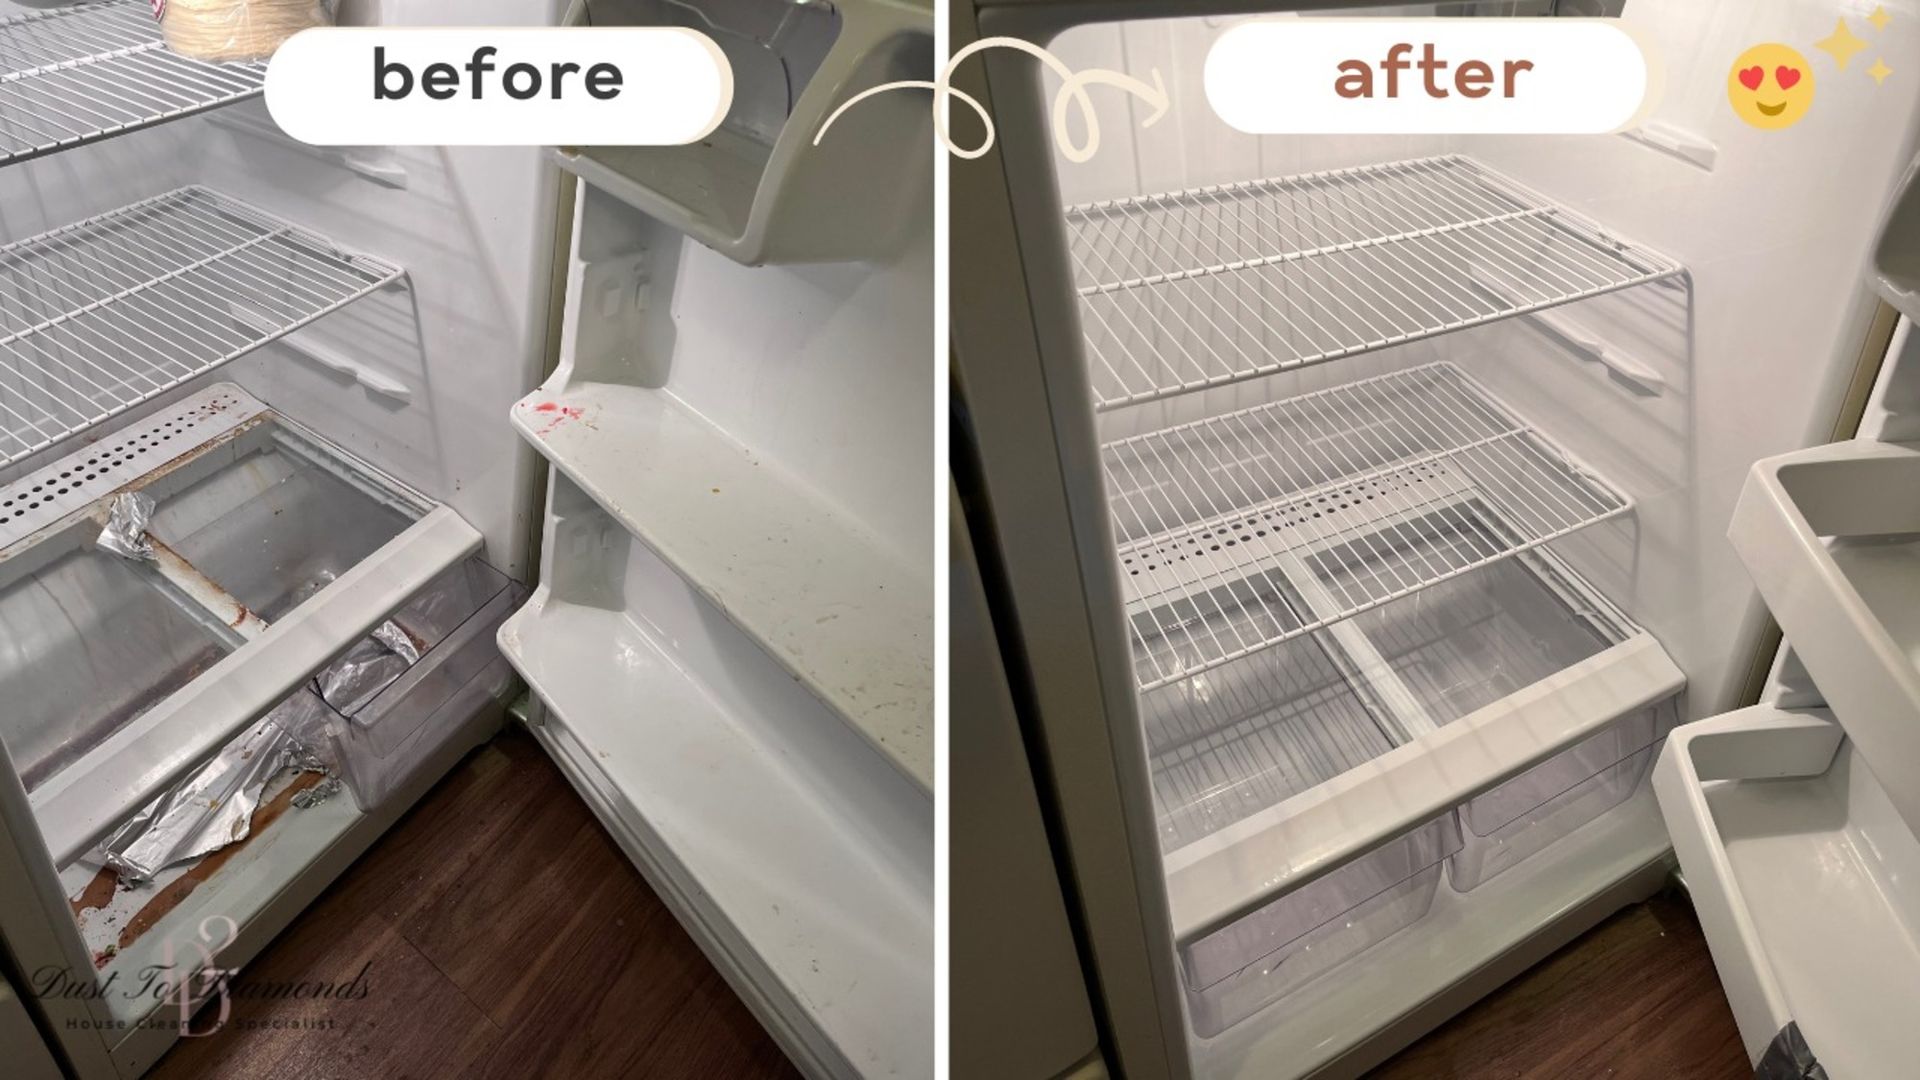 A before and after photo of an empty refrigerator.